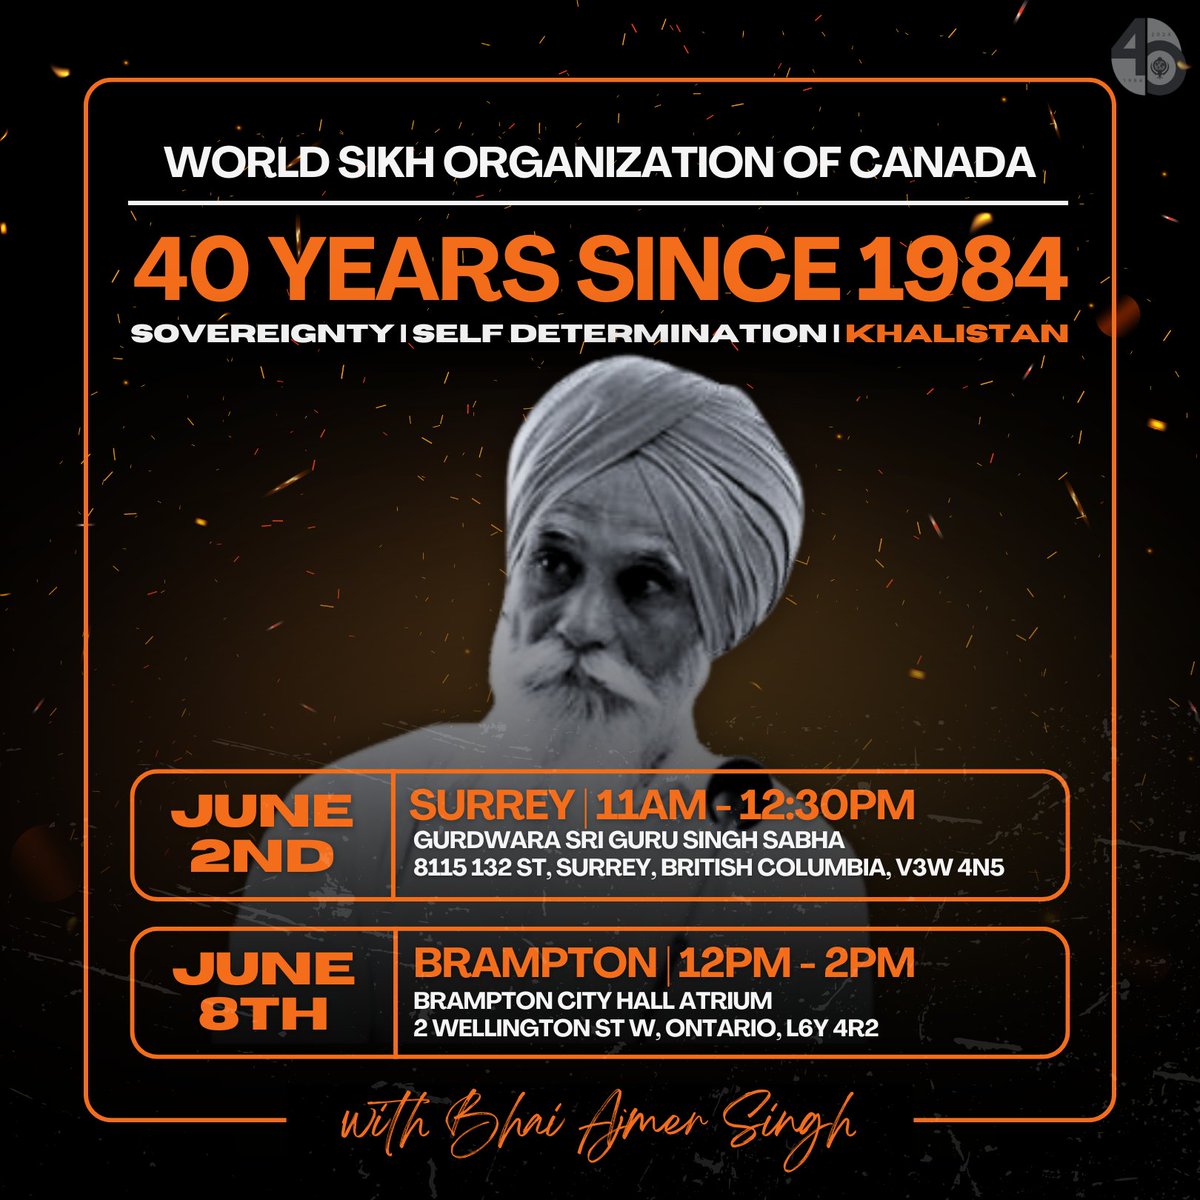 Join us in Surrey and Brampton to commemorate the 40th anniversary of 1984, with special guest speaker Bhai Ajmer Singh. Bhai Sahib is a prominent Sikh commentator and author who has written several books on Sikh principles, history, and Sikh sovereignty. Surrey: